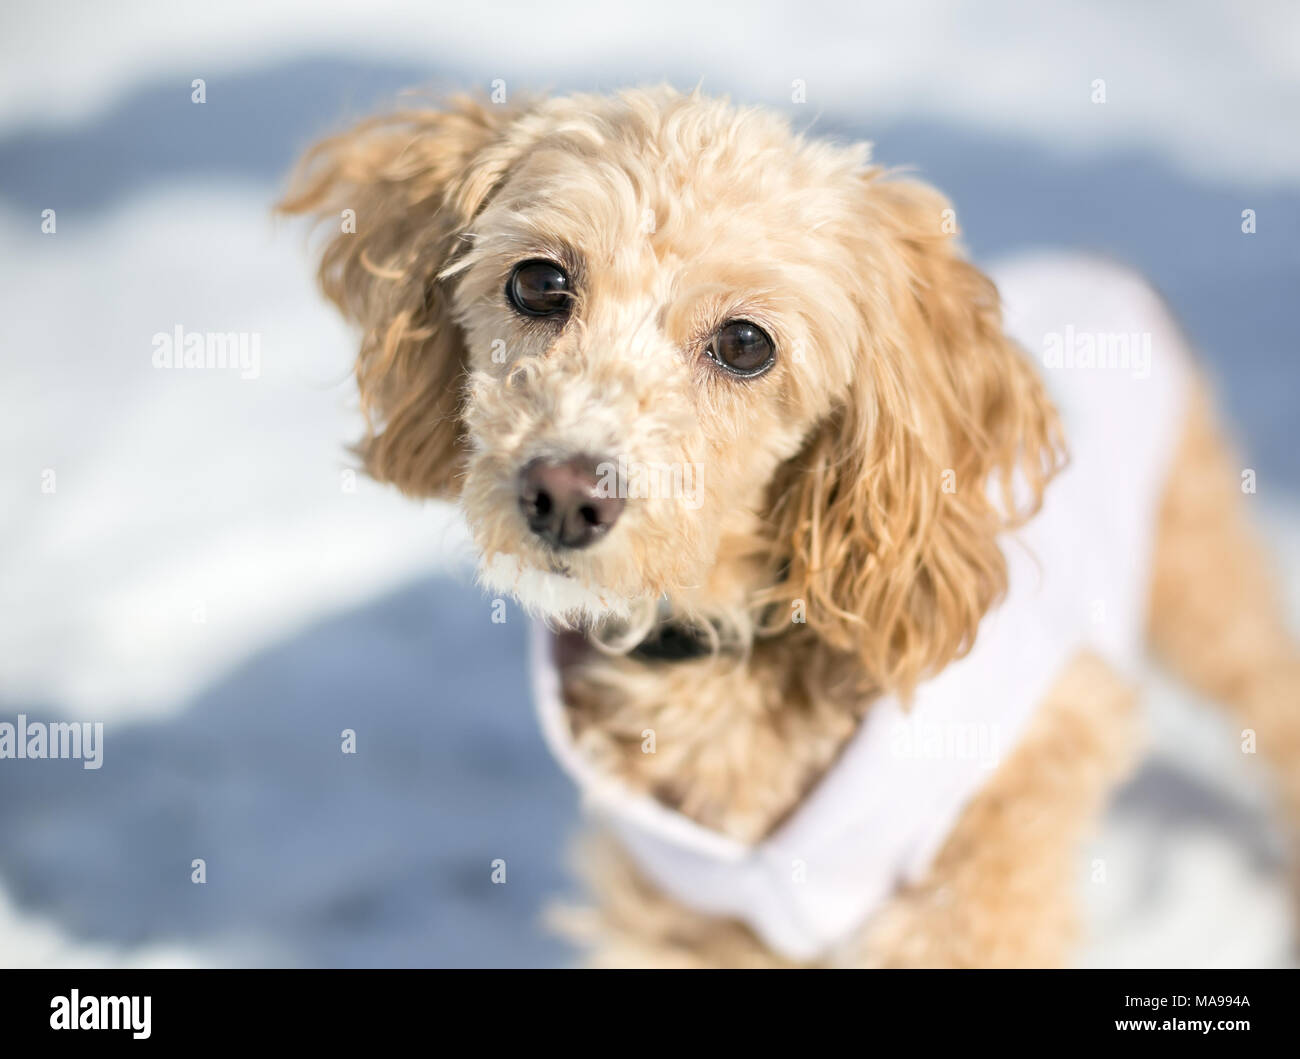 Spaniel Poodle High Resolution Stock Photography and Images - Alamy